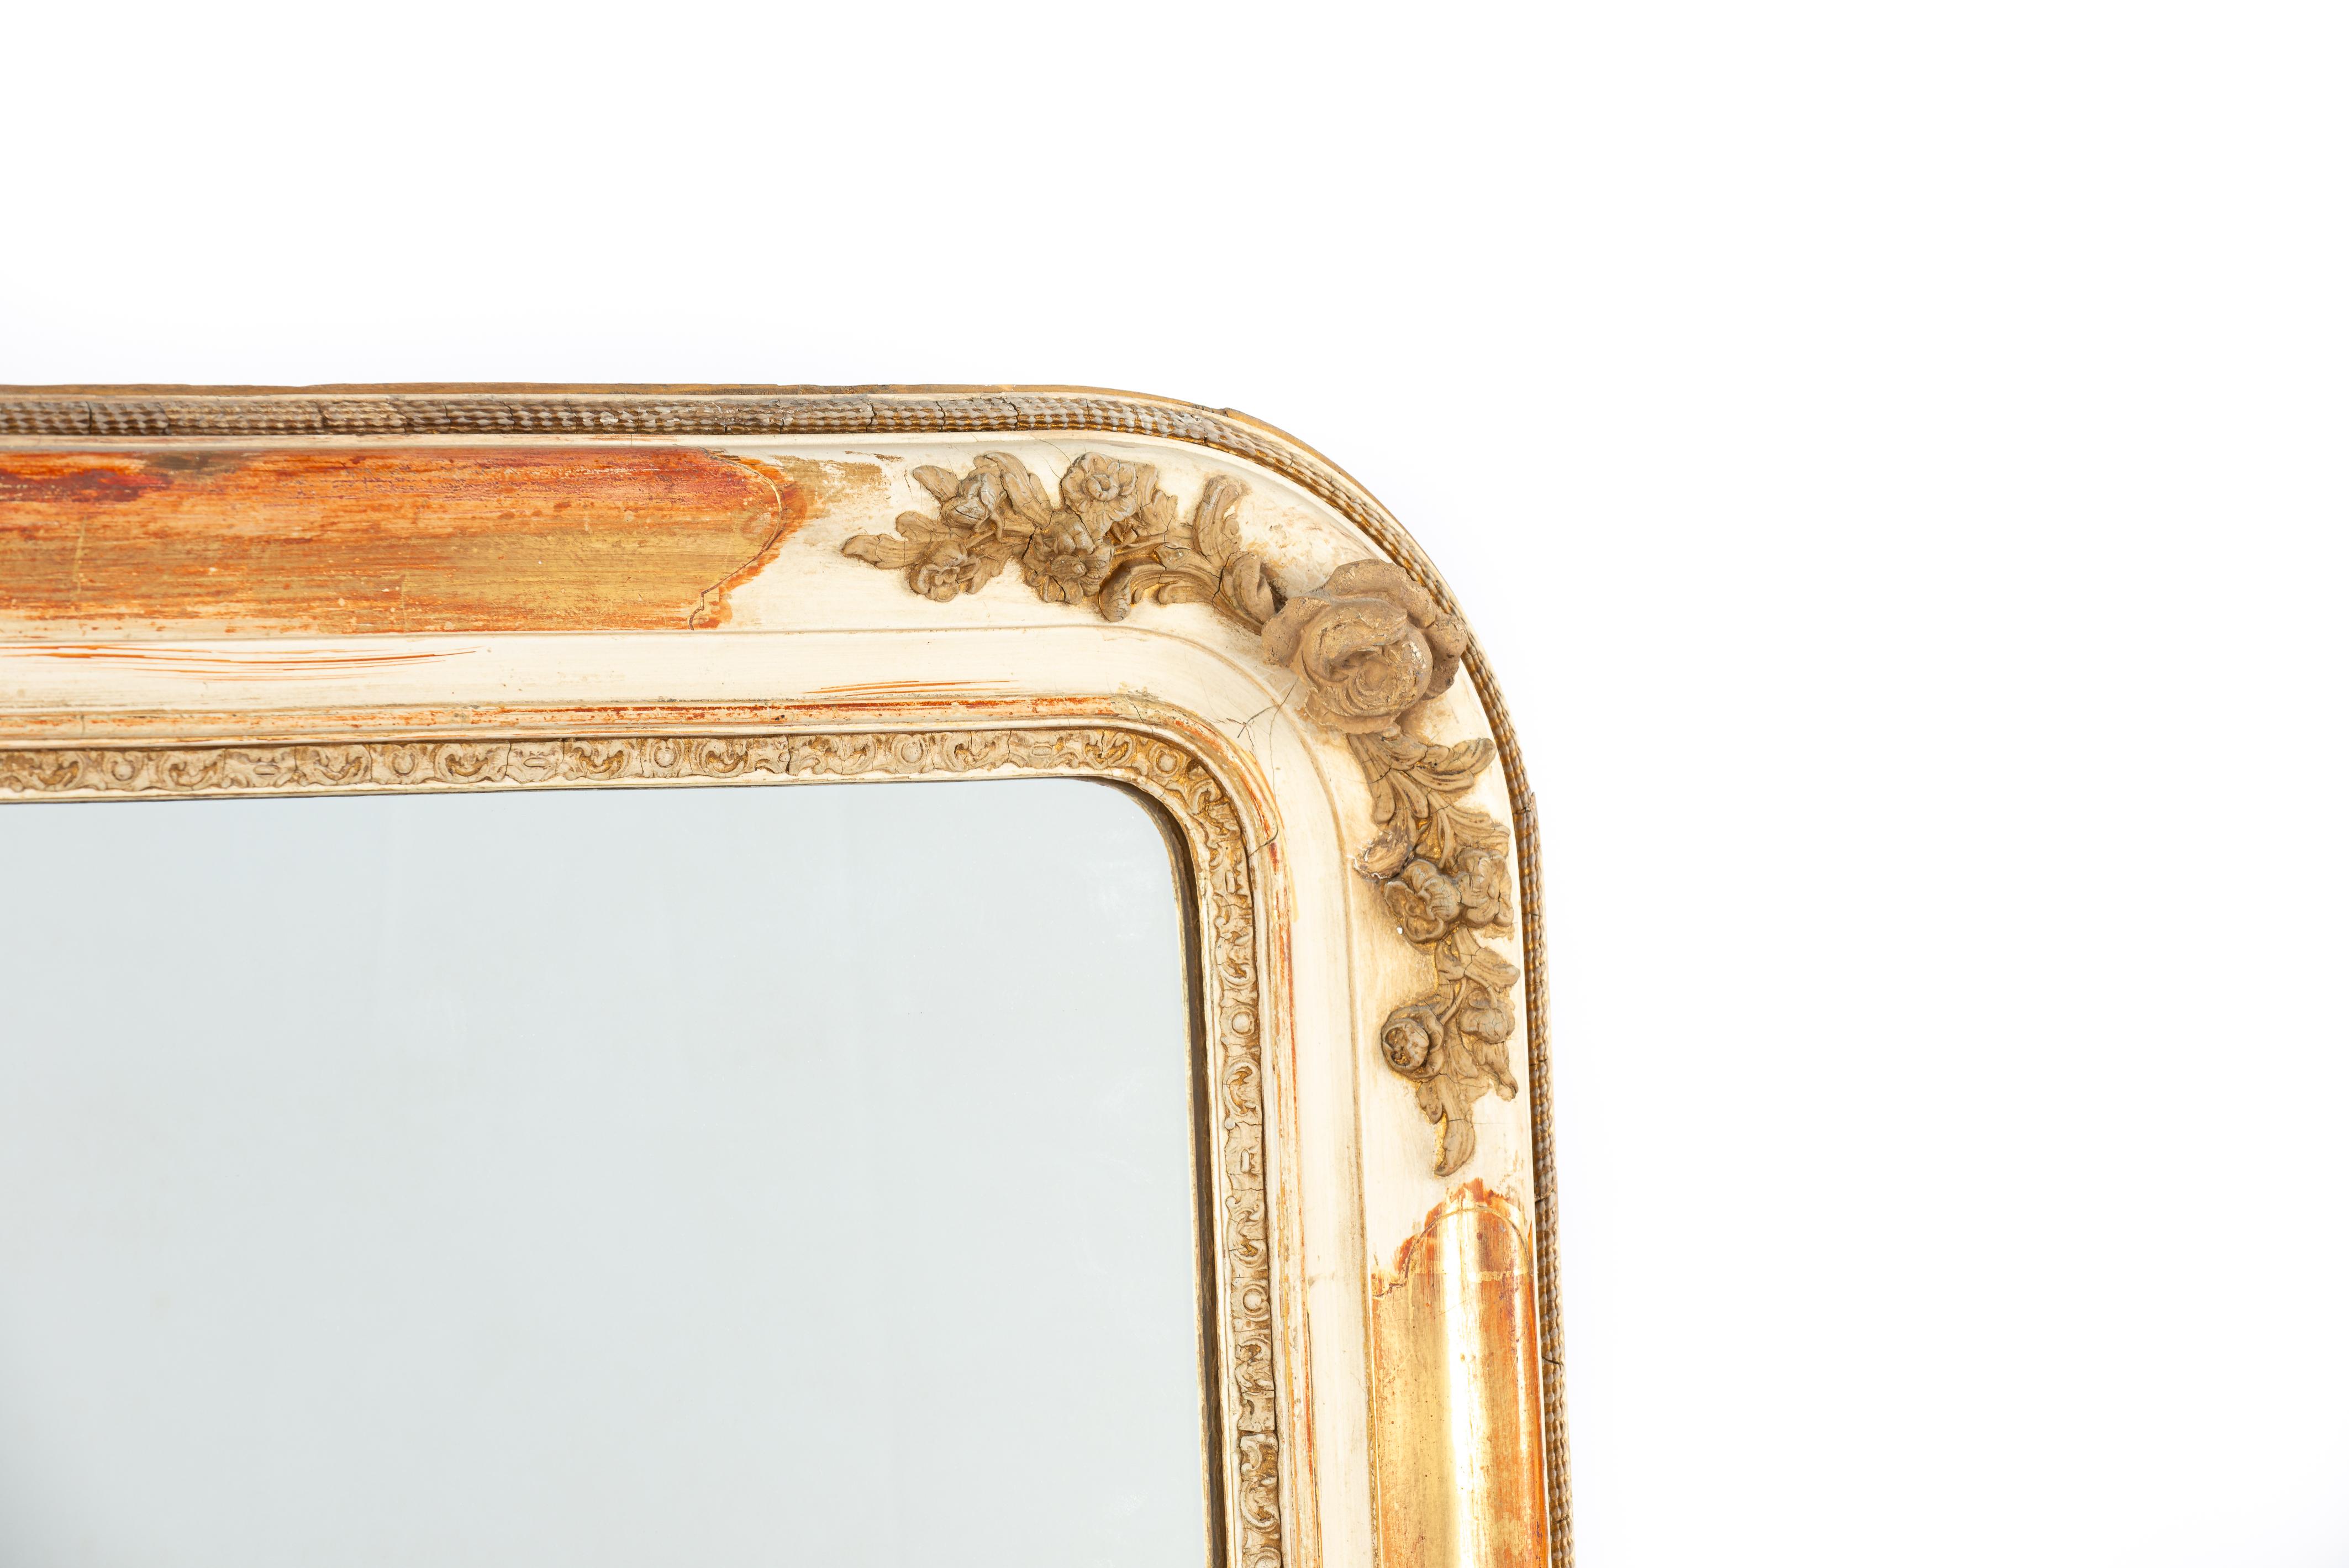 This antique mantel mirror was crafted in southern France in the mid-19th century. The mirror features quarter-round top corners, characteristic of the Louis Philippe style. Its frame is made of solid pine wood, smoothed with gesso. The mirror was